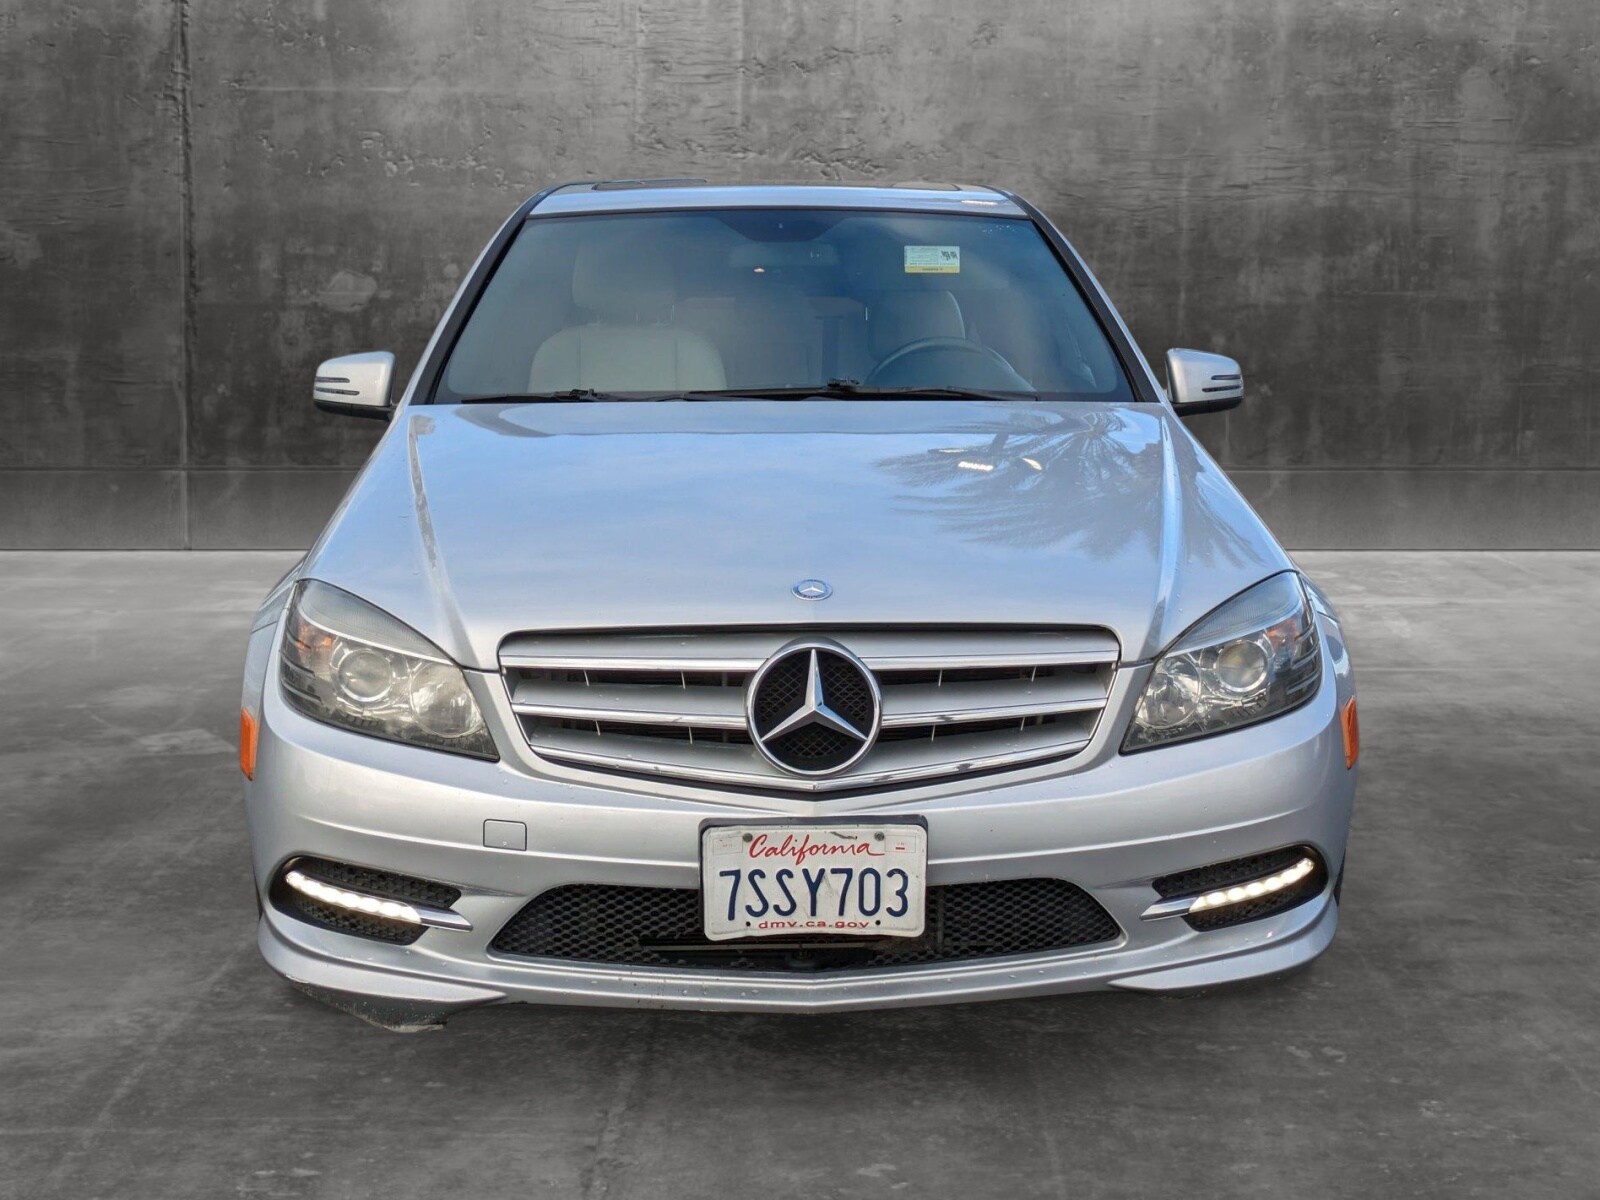 Used 2011 Mercedes-Benz C-Class C300 Sport with VIN WDDGF5EB5BR187244 for sale in Las Vegas, NV